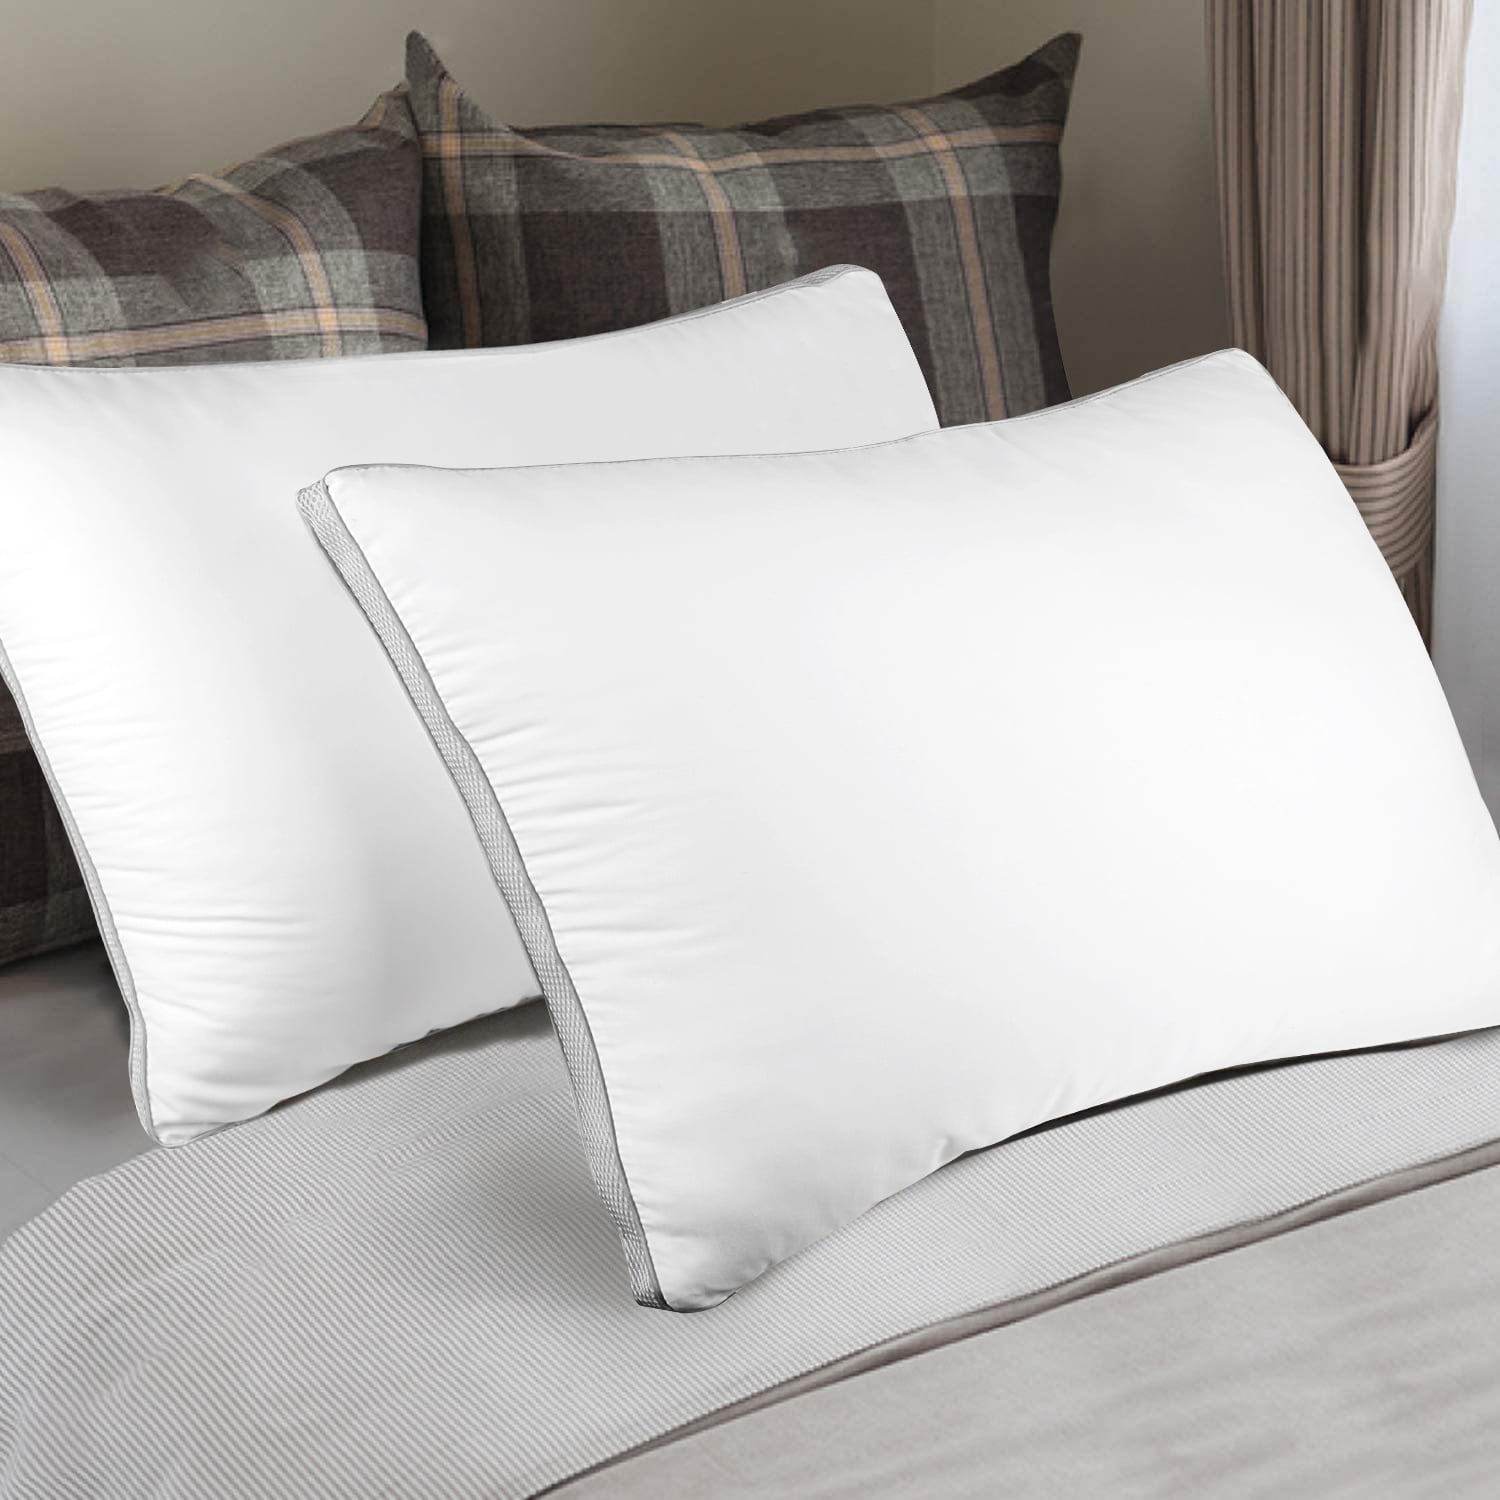 2 PACK QUILTED PILLOW EXTRA DEEP HOLLOWFIBER FILLING SUPER FIRM SOFT HOTEL 